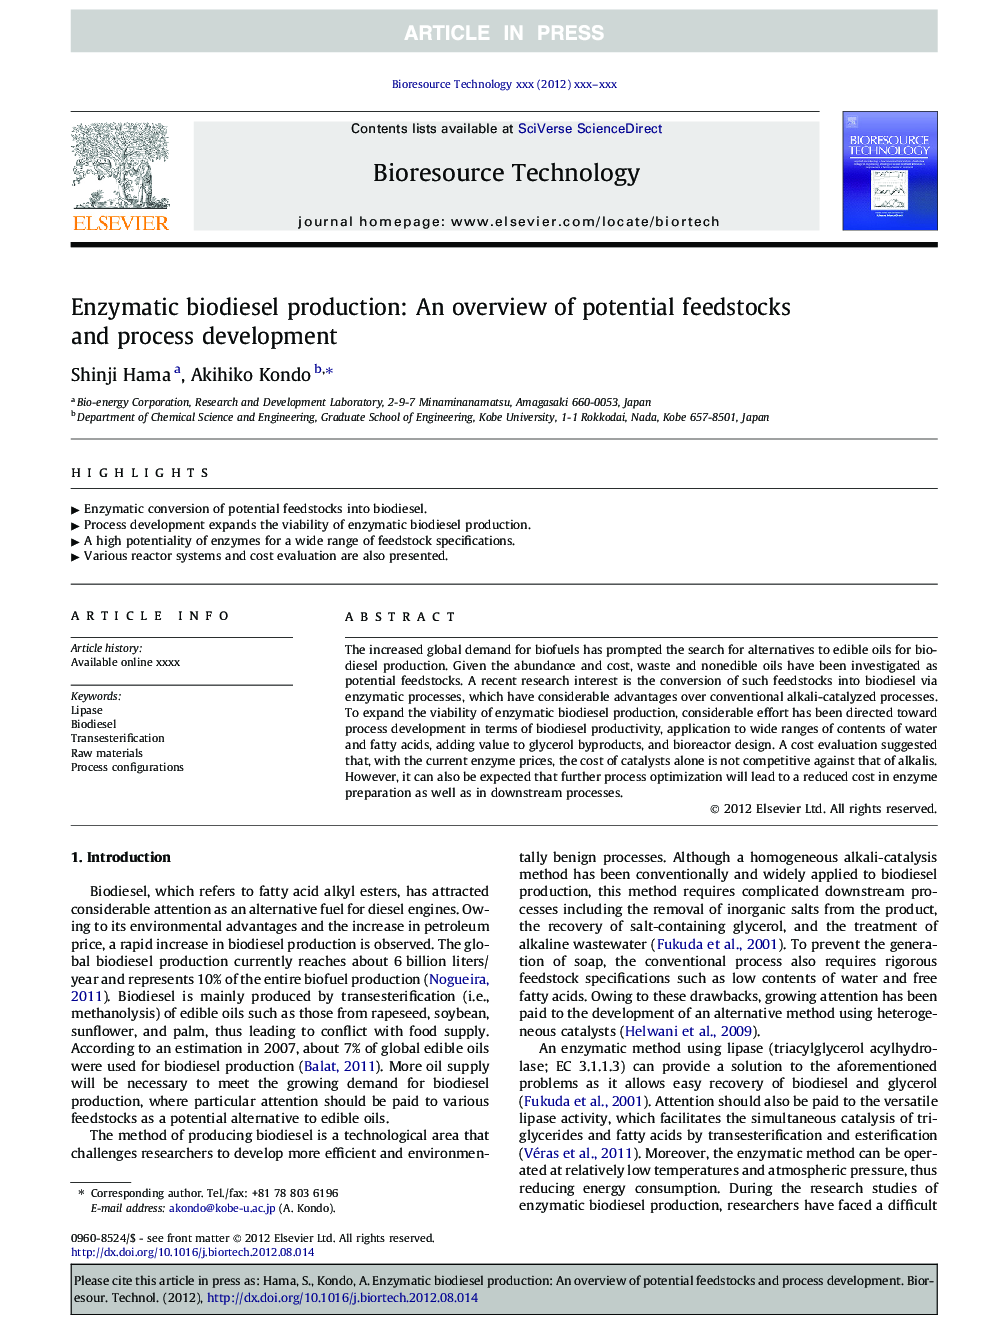 Enzymatic biodiesel production: An overview of potential feedstocks and process development